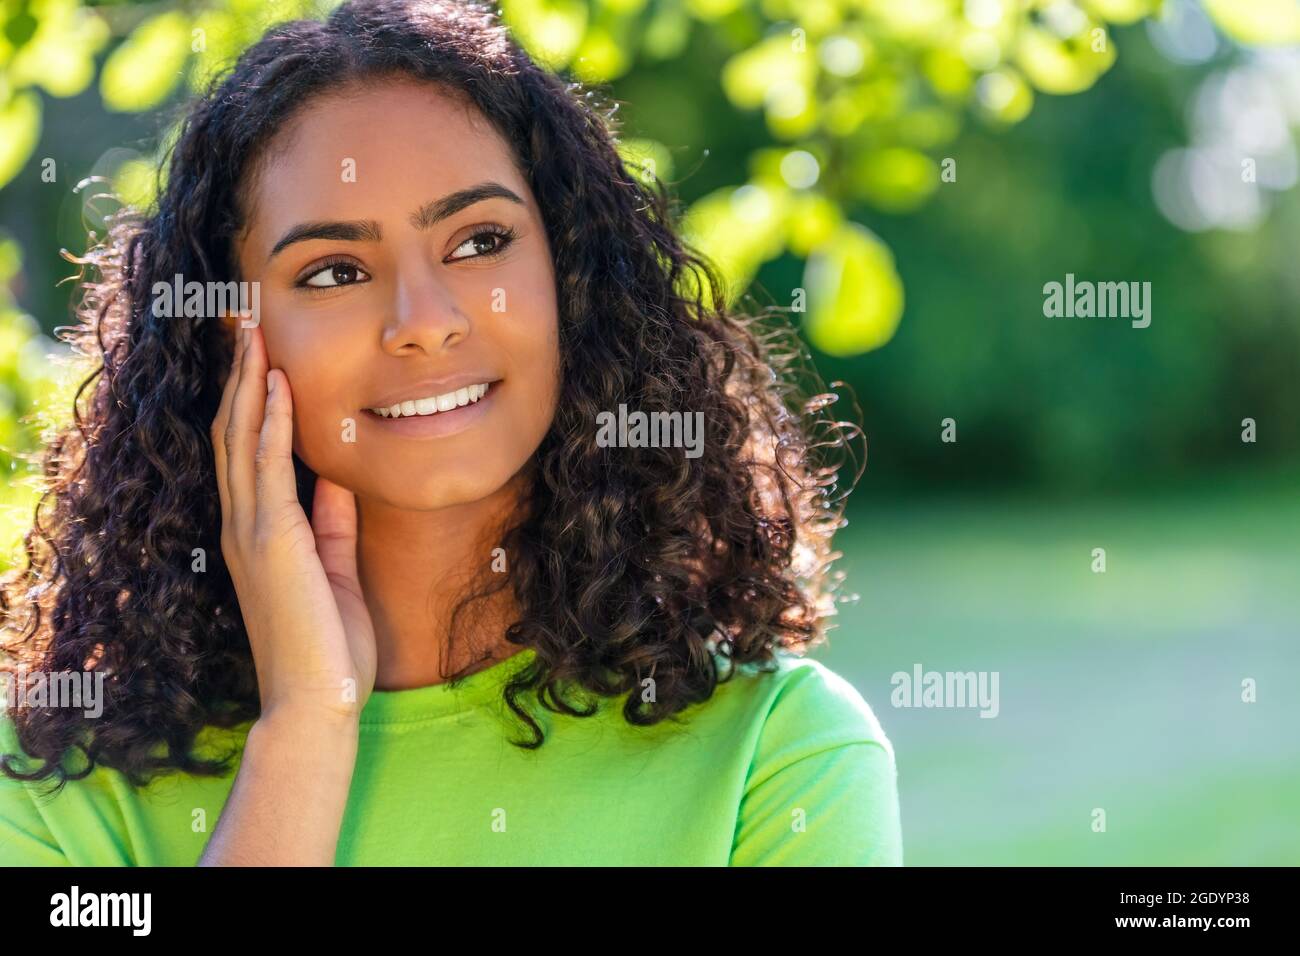 Outdoor portrait of beautiful happy mixed race African American girl teenager female young woman thinking and smiling with perfect teeth with a natura Stock Photo